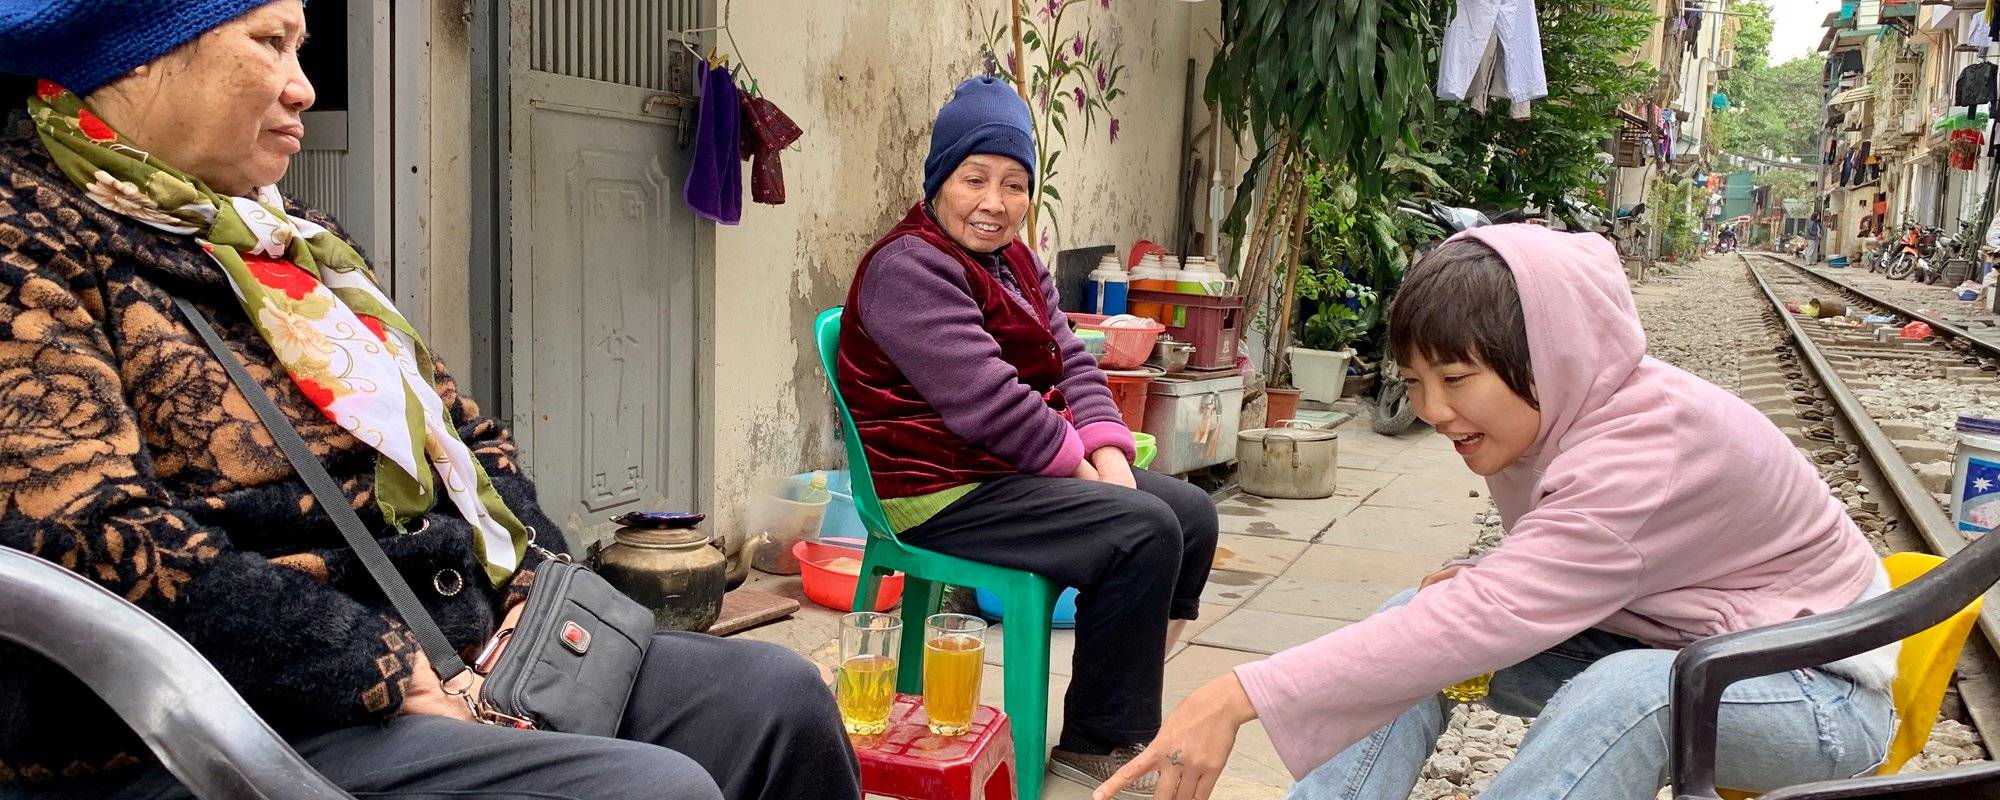 Tea with the locals and helping the community - Train Street, Hanoi, Vietnam